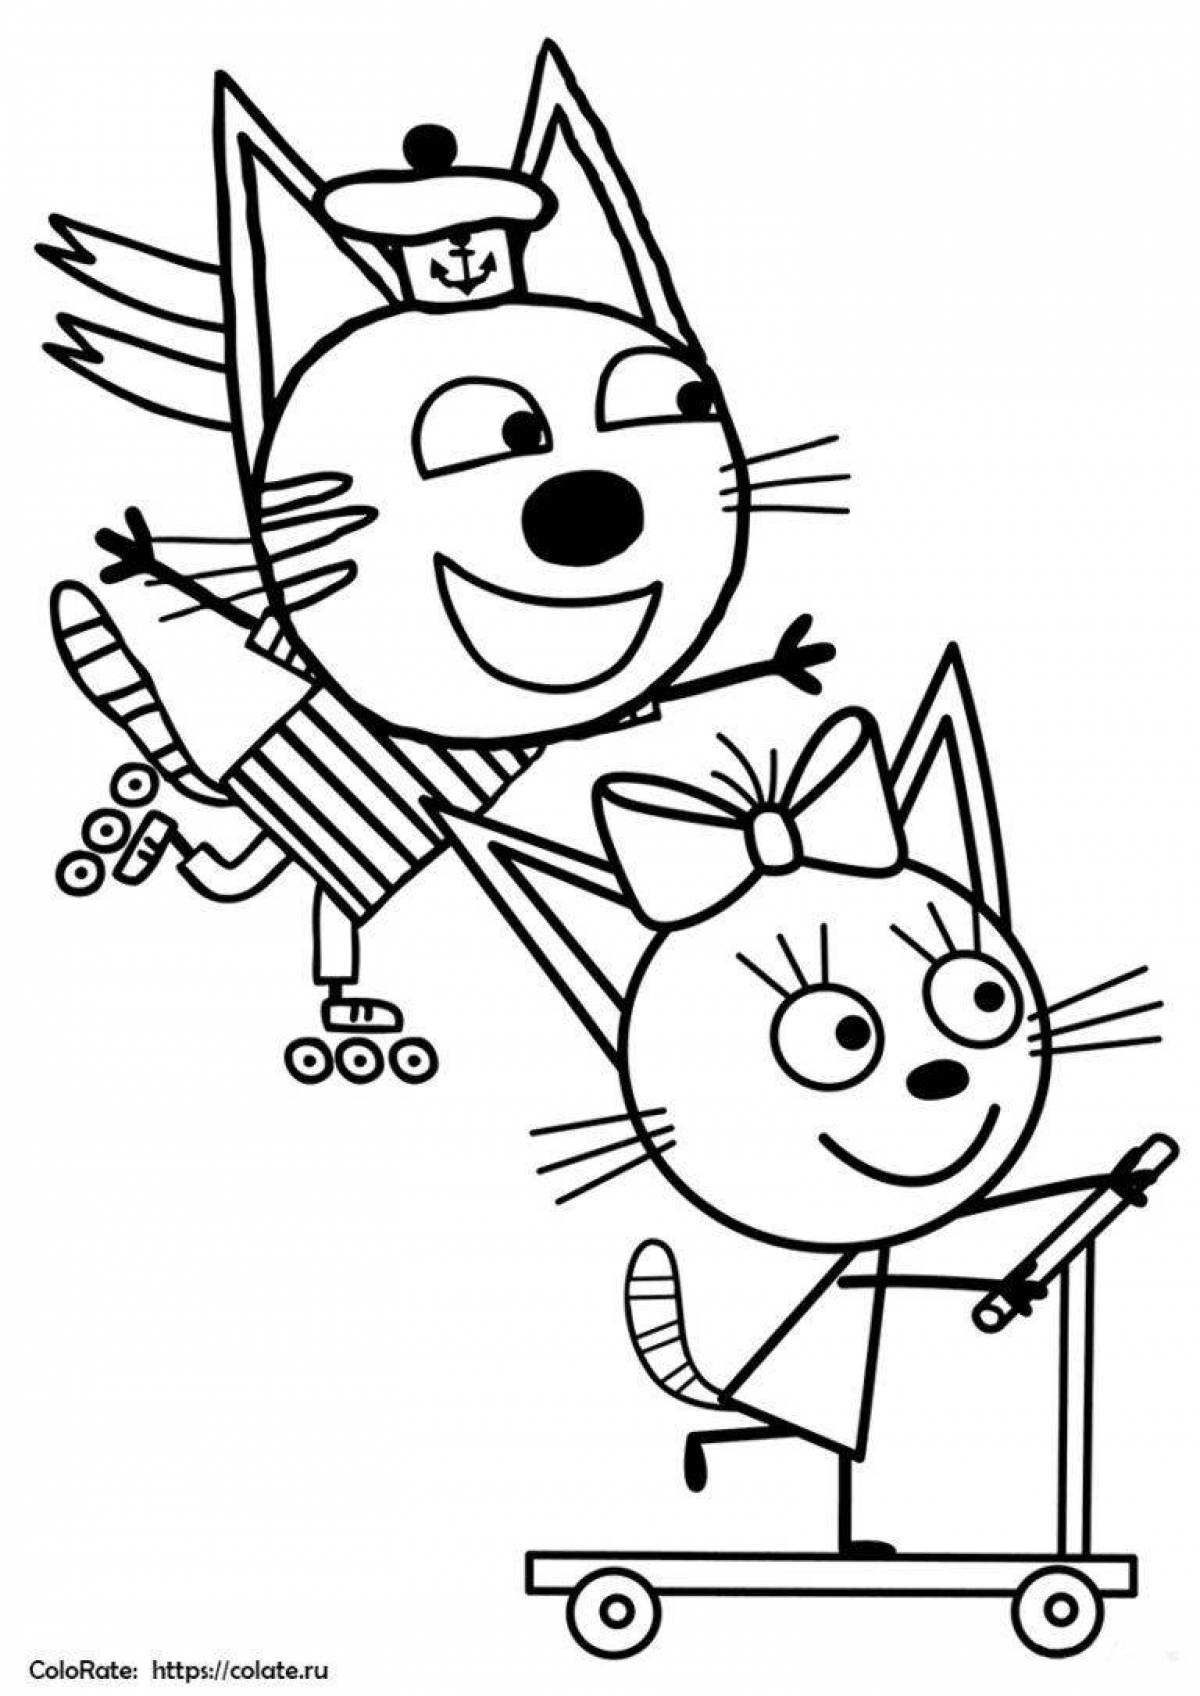 Naughty family of three cats coloring book